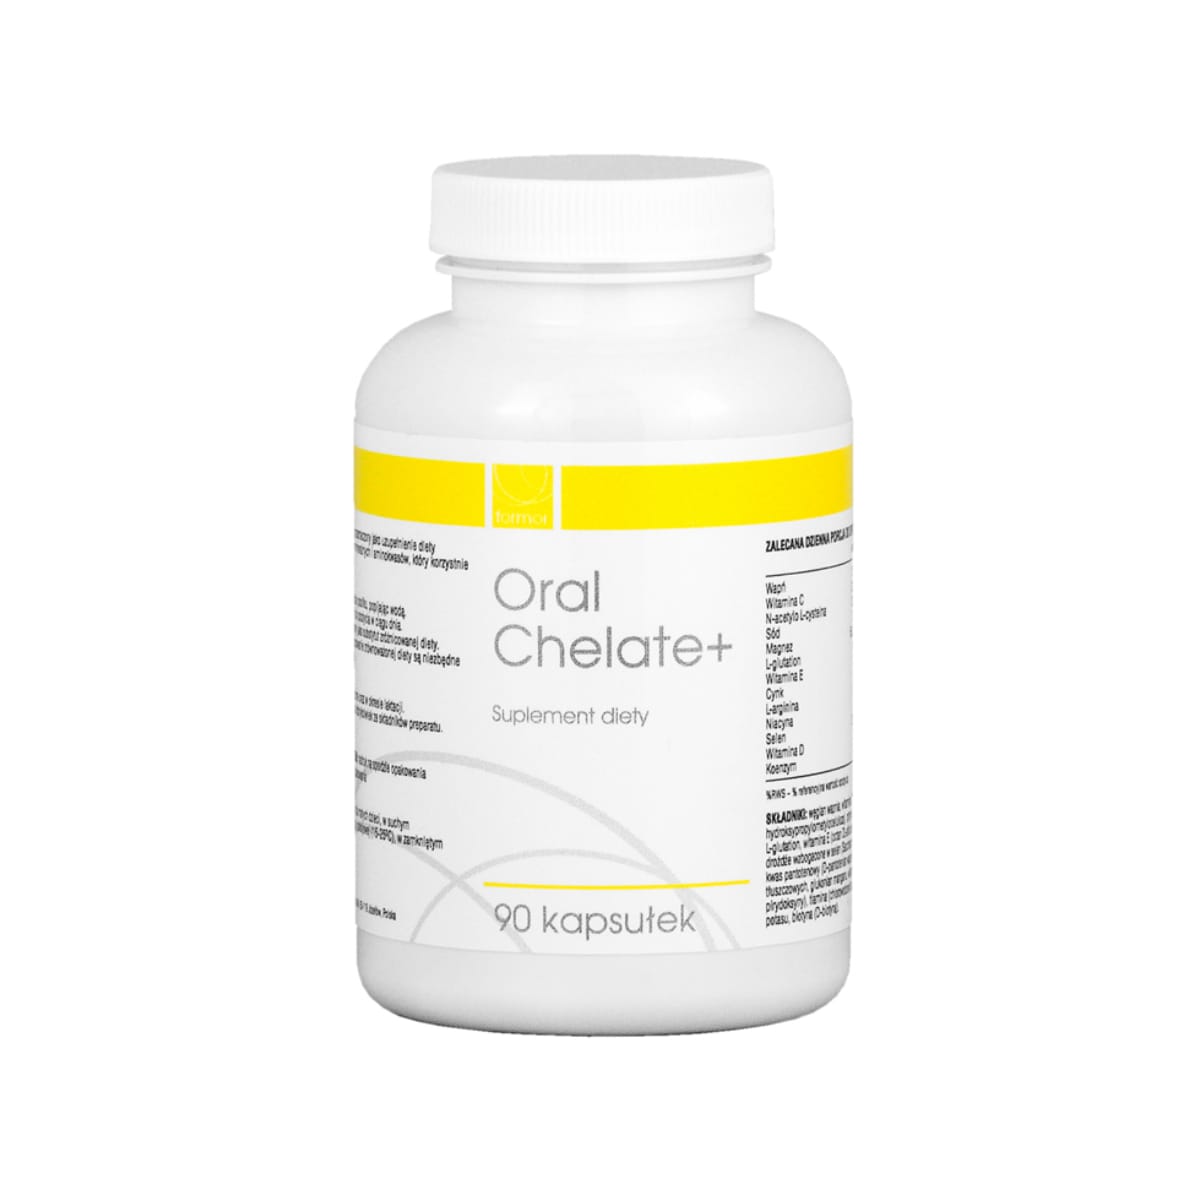 Oral Chelate